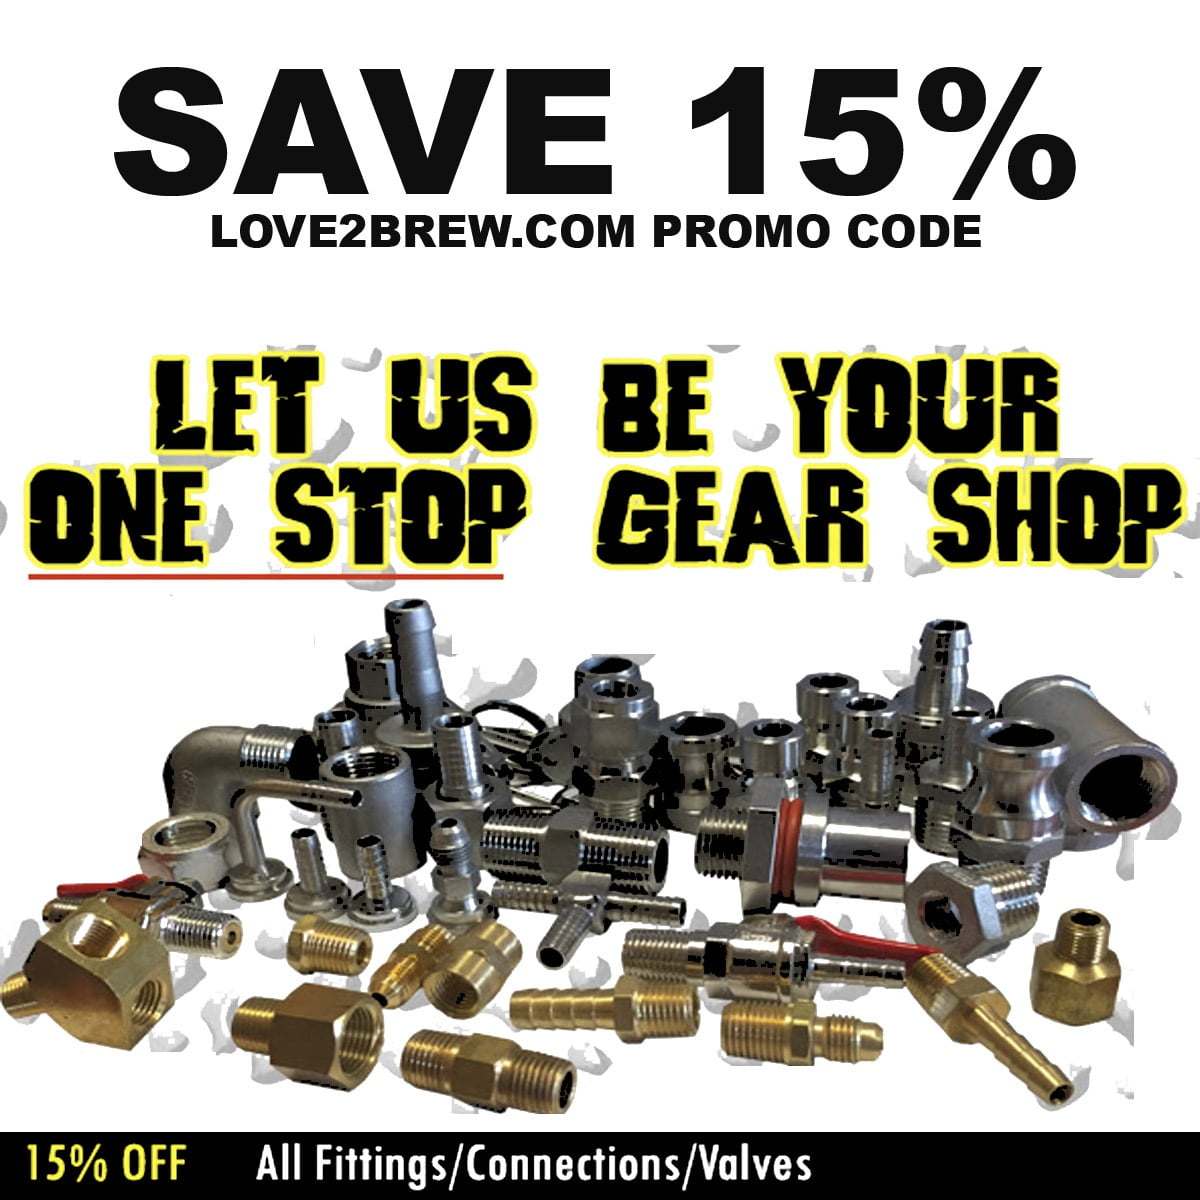 Love2Brew.com Promo Code for 15% off fittings and valves!